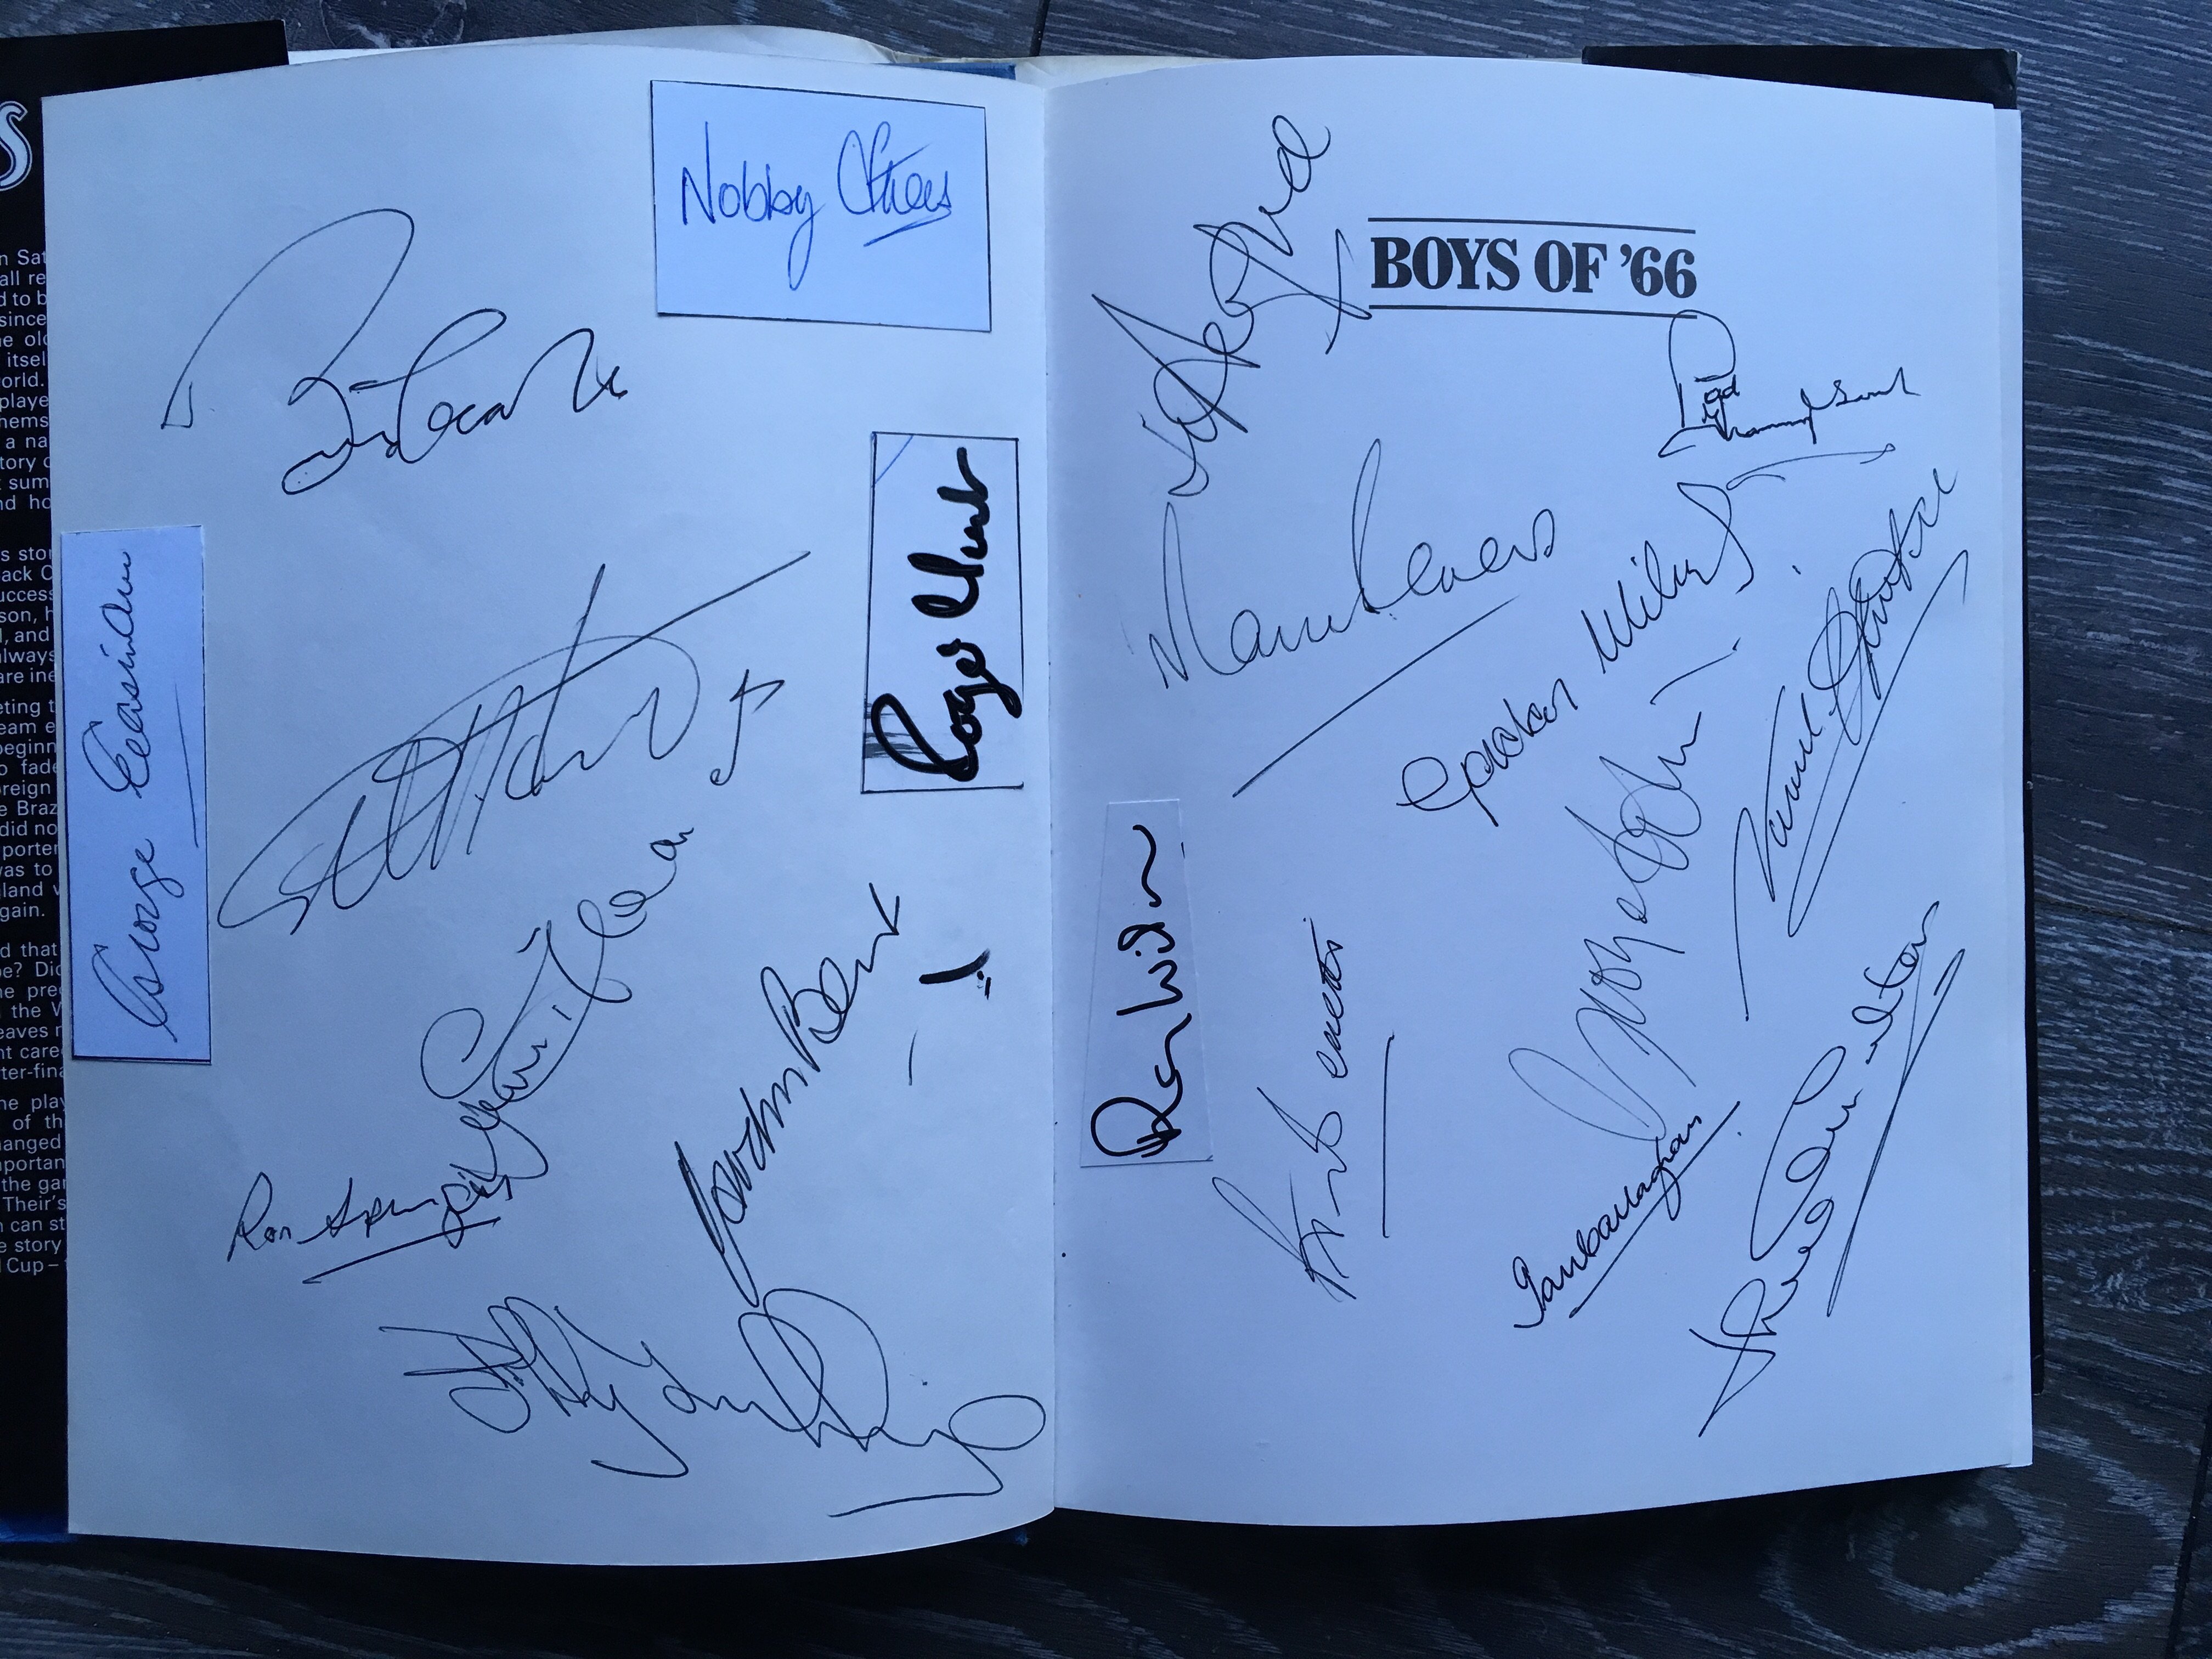 1966 England World Cup Signed Football Book: 1981 Book Boys Of 66 is signed inside on blank inner